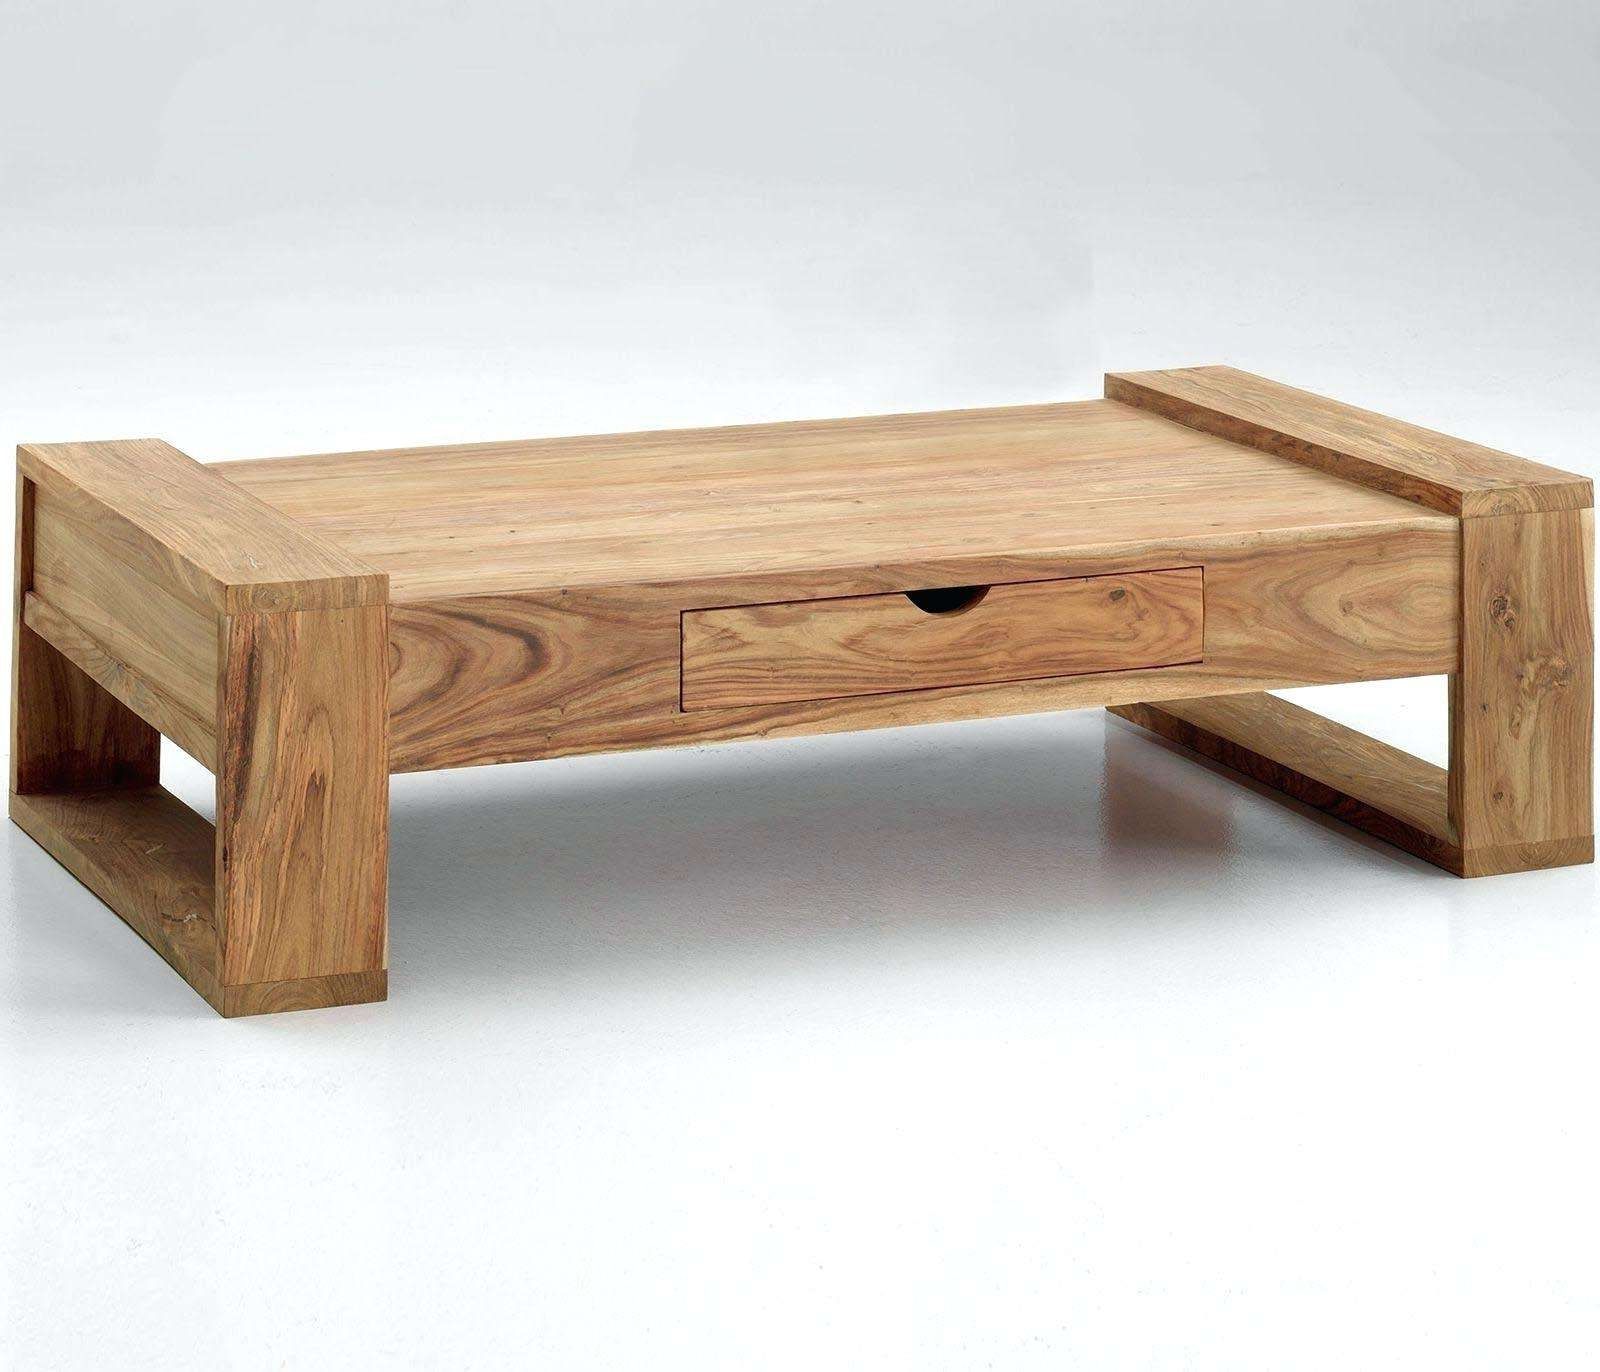 Most Recently Released Low Coffee Tables Inside Coffee Tables : Small Low Coffee Table Design Ideas Oak Round Side (View 16 of 20)